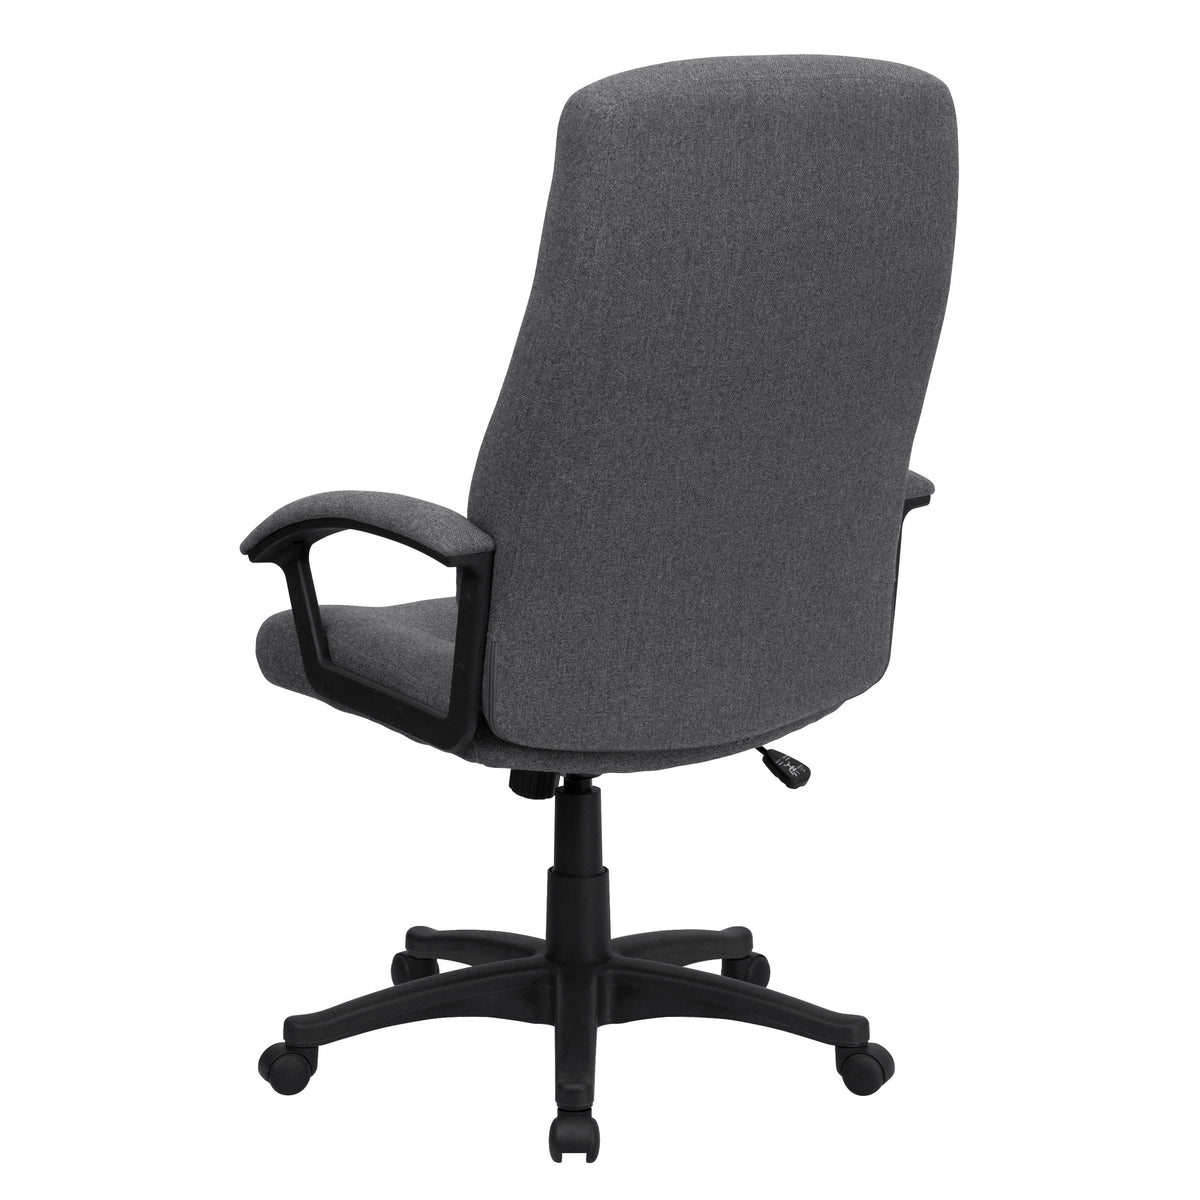 Gray |#| High Back Gray Fabric Executive Chair with Two Line Horizontal Stitch Back